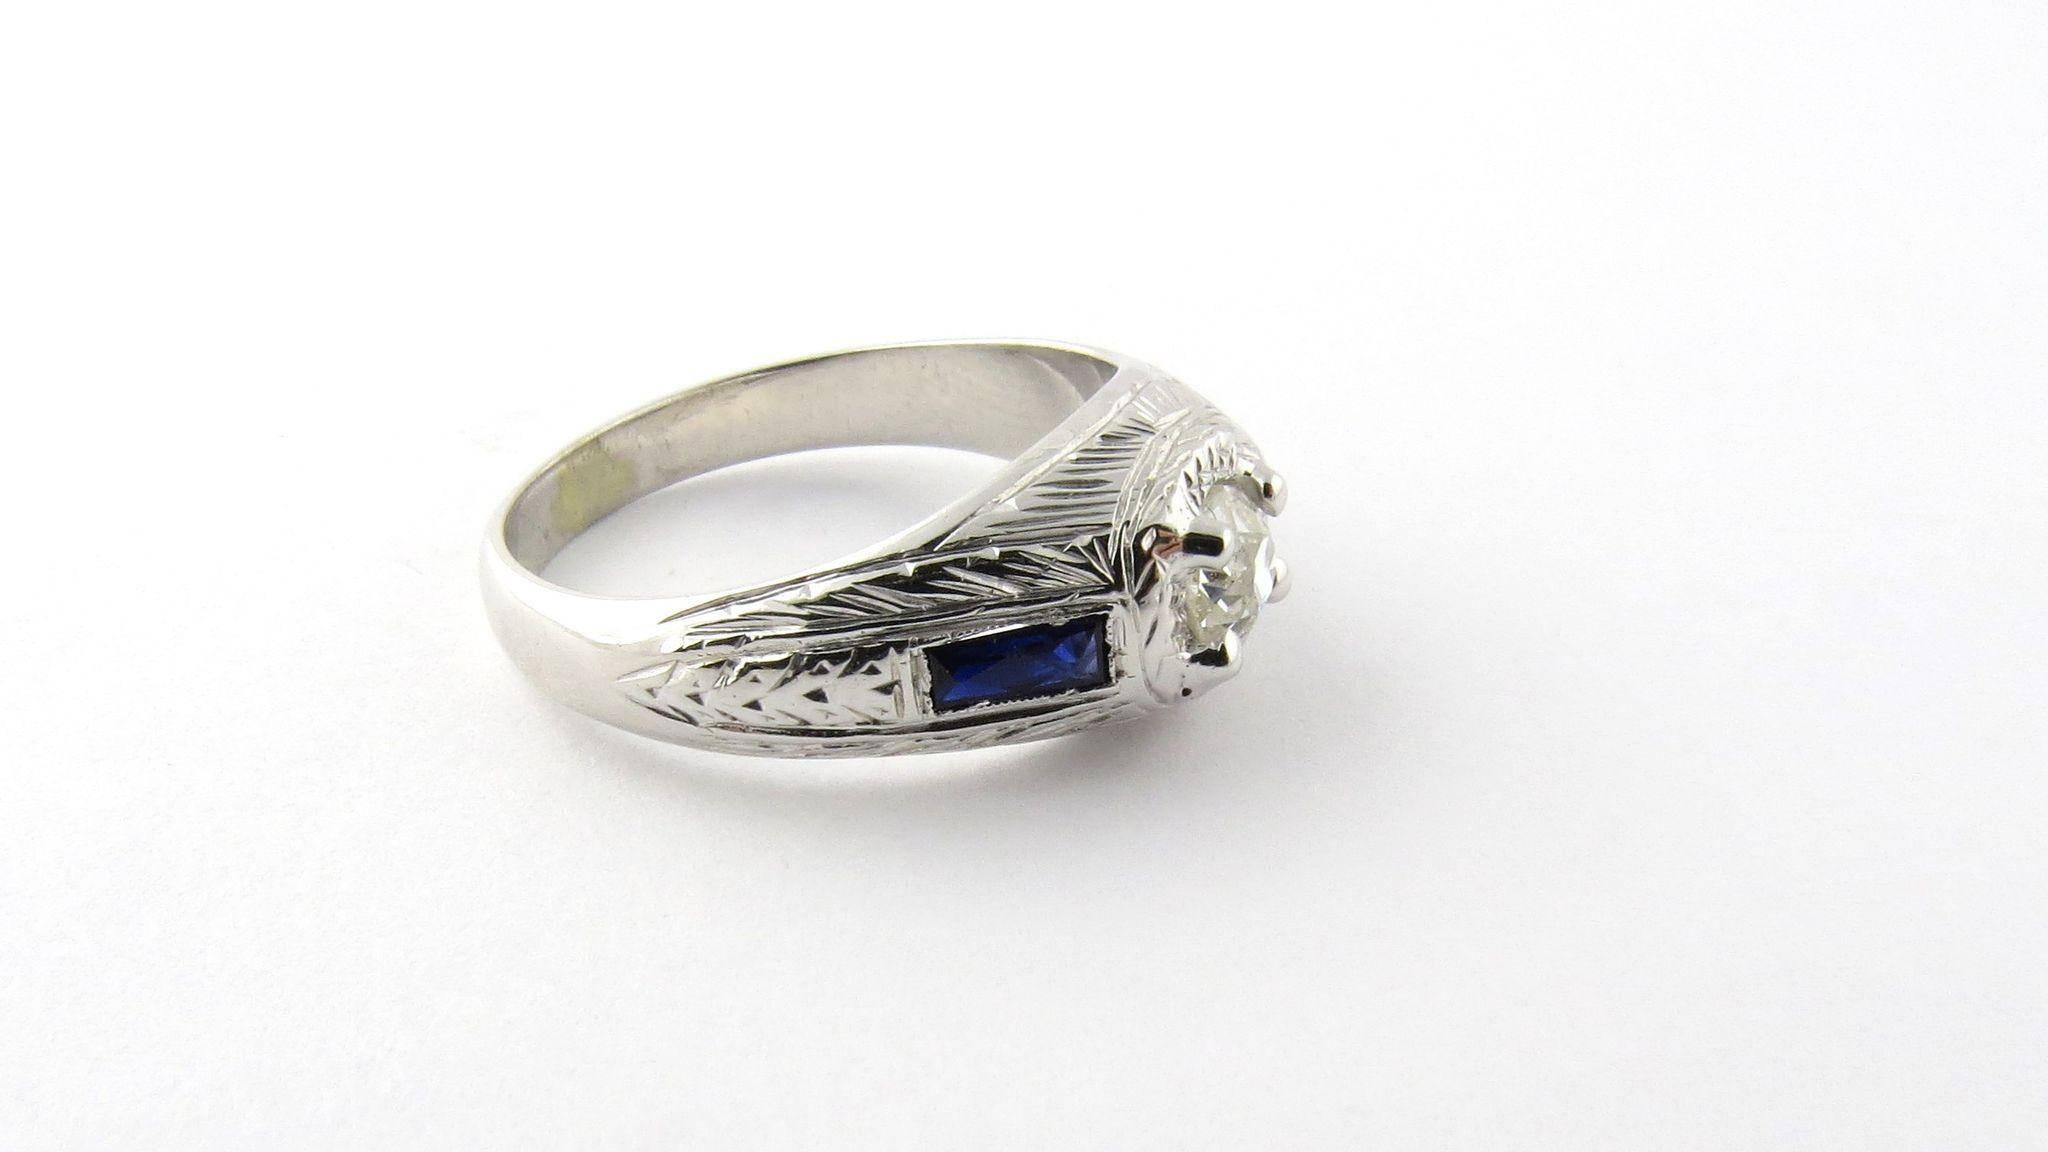 Vintage Art Deco 18K White Gold Old Mine Diamond and Sapphire Ring Size 7.25 

This art deco diamond ring is set with a center old mine round diamond .40 carats. SI2 clarity, J-K color 

The rectangular milgrain set genuine blue sapphires are each